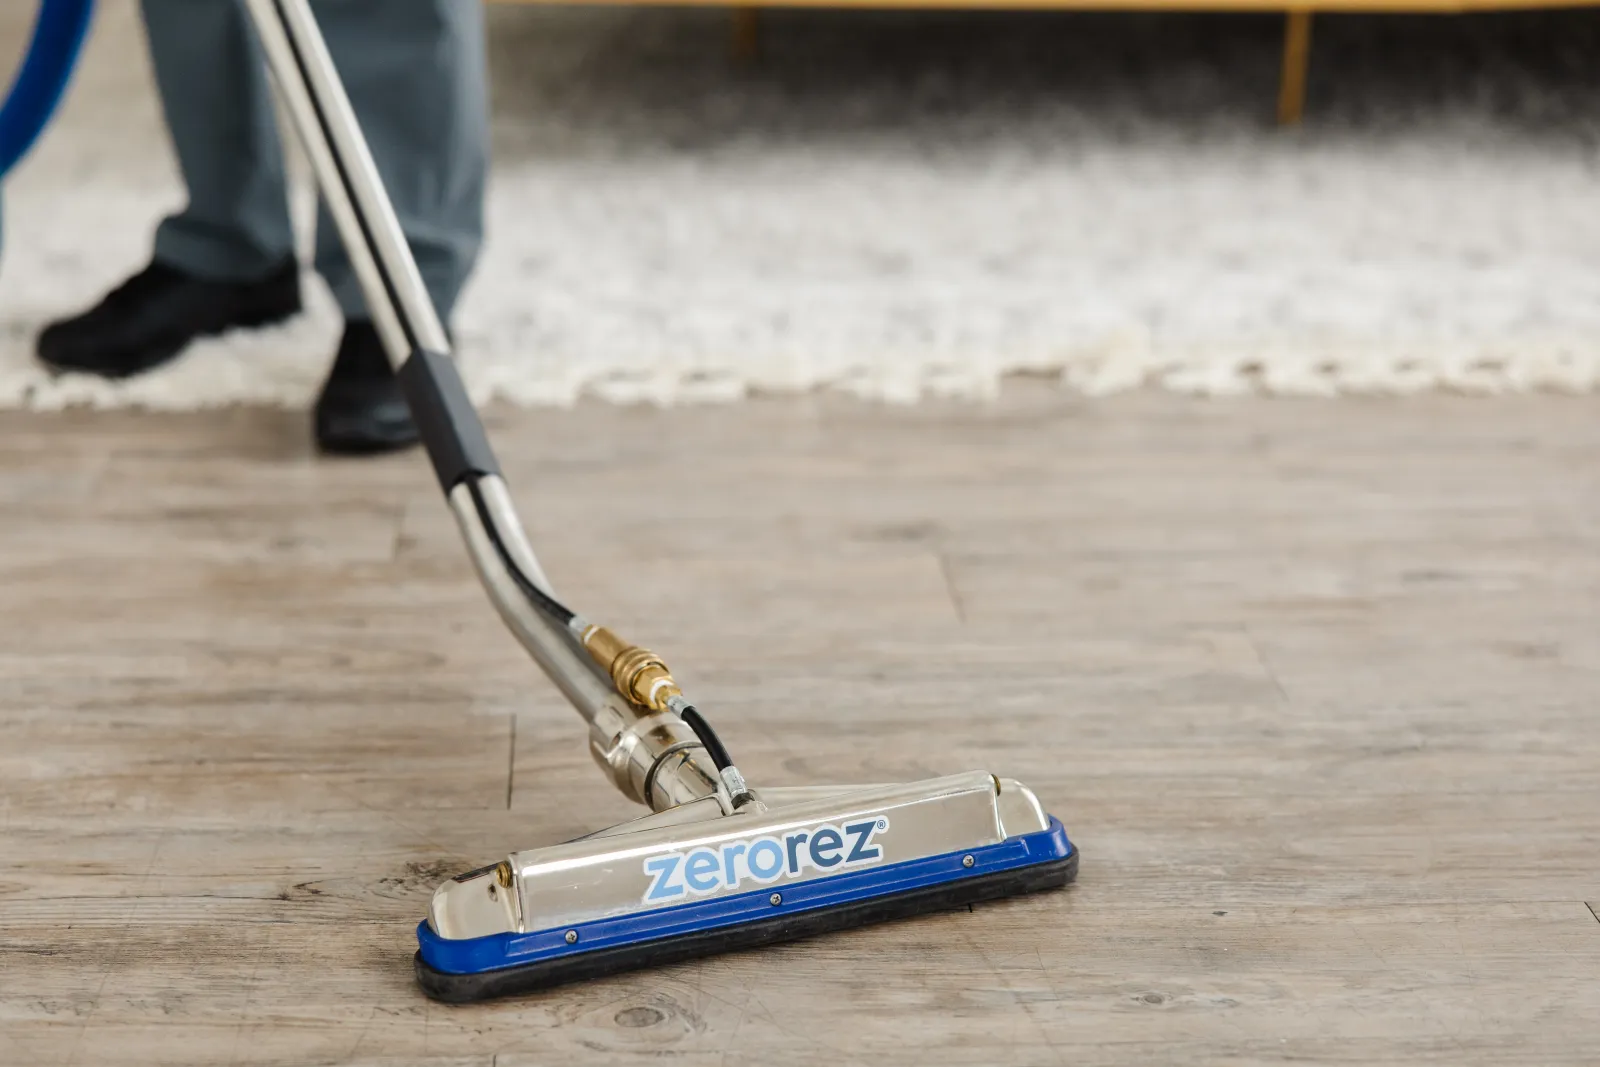 Zerorez cleaning wand on a laminate floor, being used to clean it